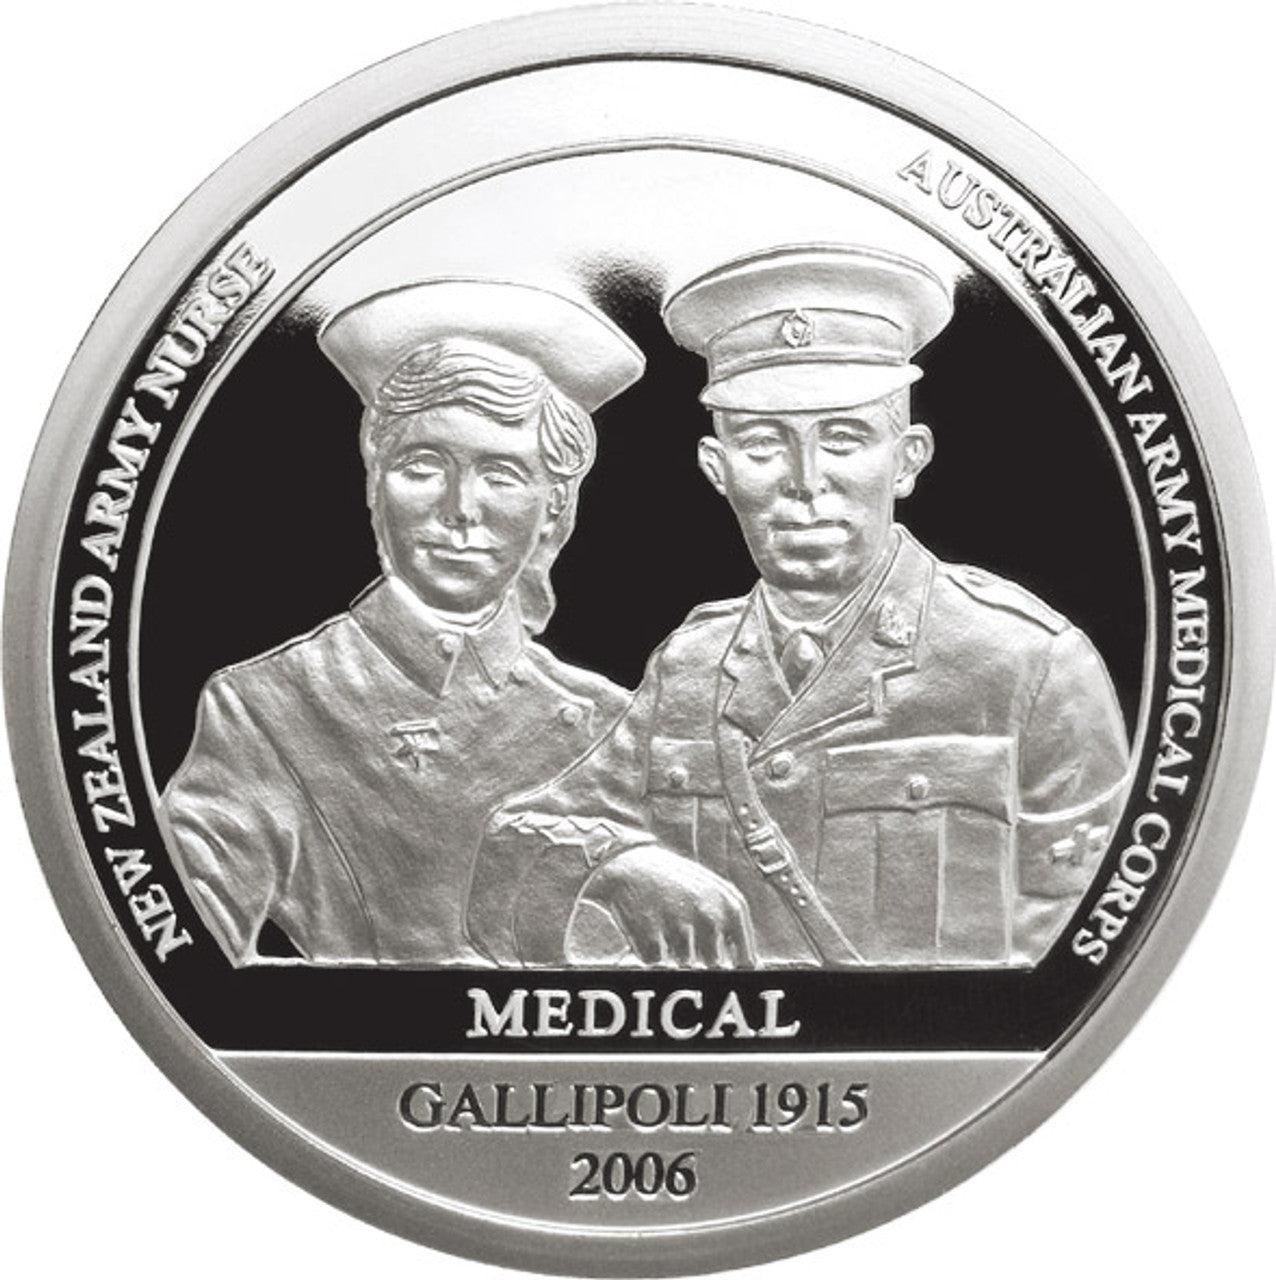 Introducing the Sands of Gallipoli 2006 release Our People Limited Edition Medallion Set, a truly spectacular collection from the military specialists. This limited edition set contains all six medallions from the Our People - Their Service collection, making it a must-have for any military enthusiast or collector. www.defenceqstore.com.au